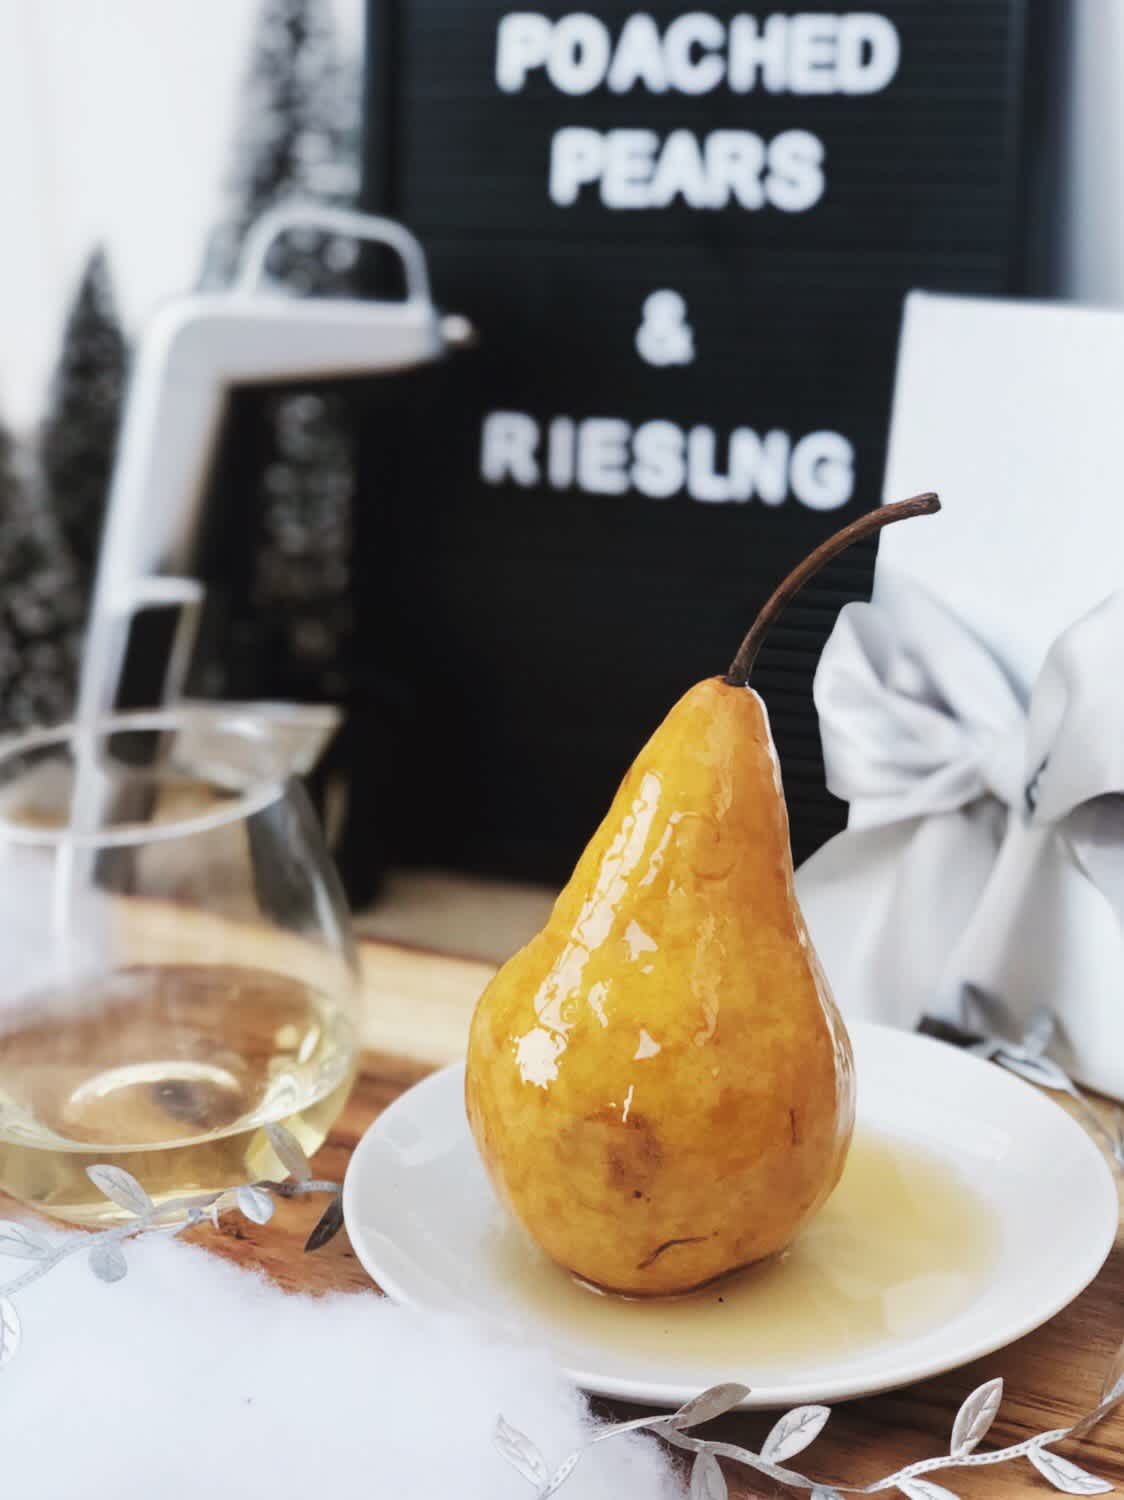 christmas wine pairings poached pair and riesling